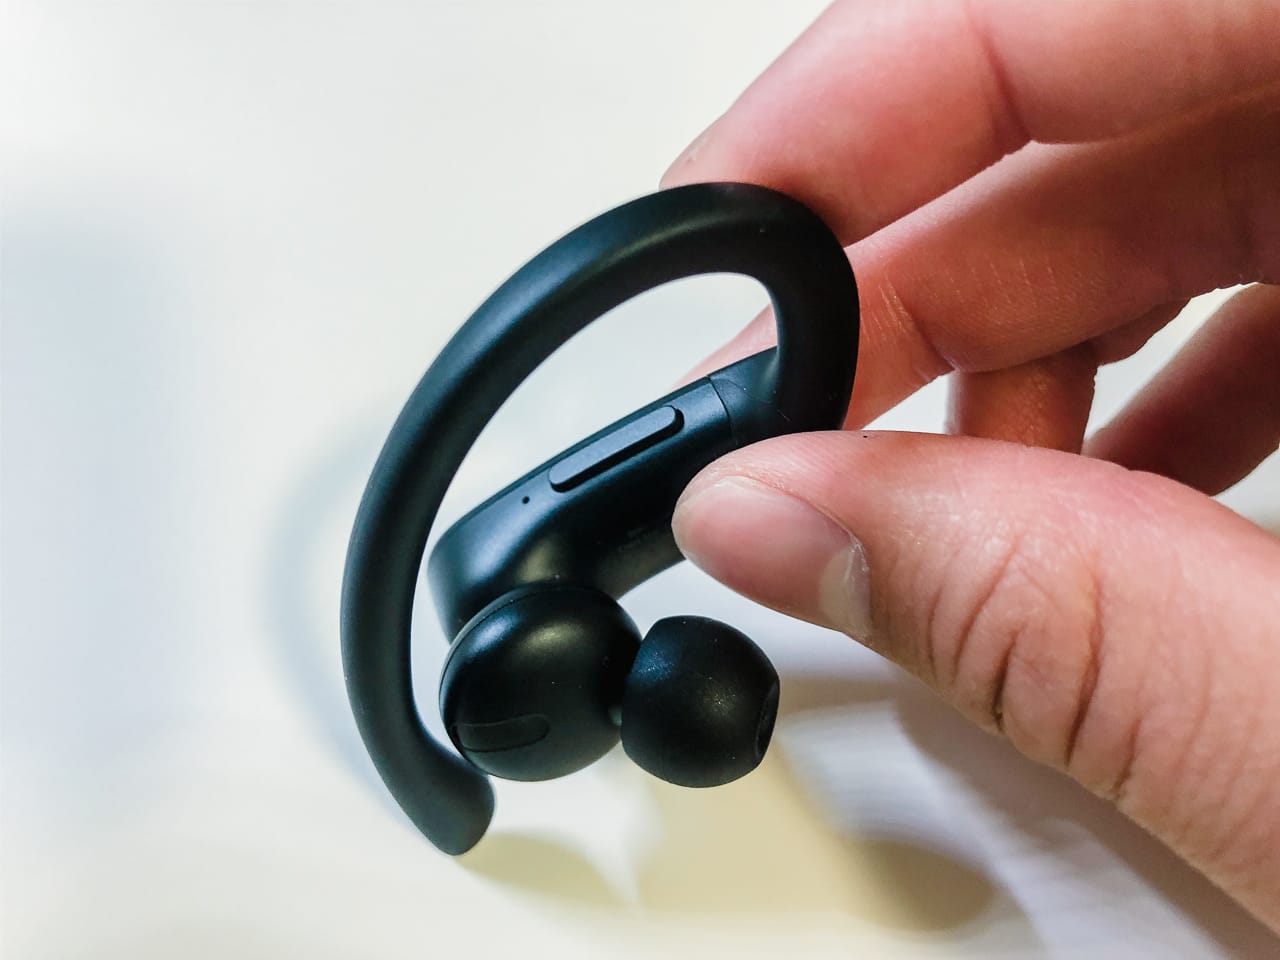 A Review Of The Powerbeats Pro Totally Wireless Headphones The